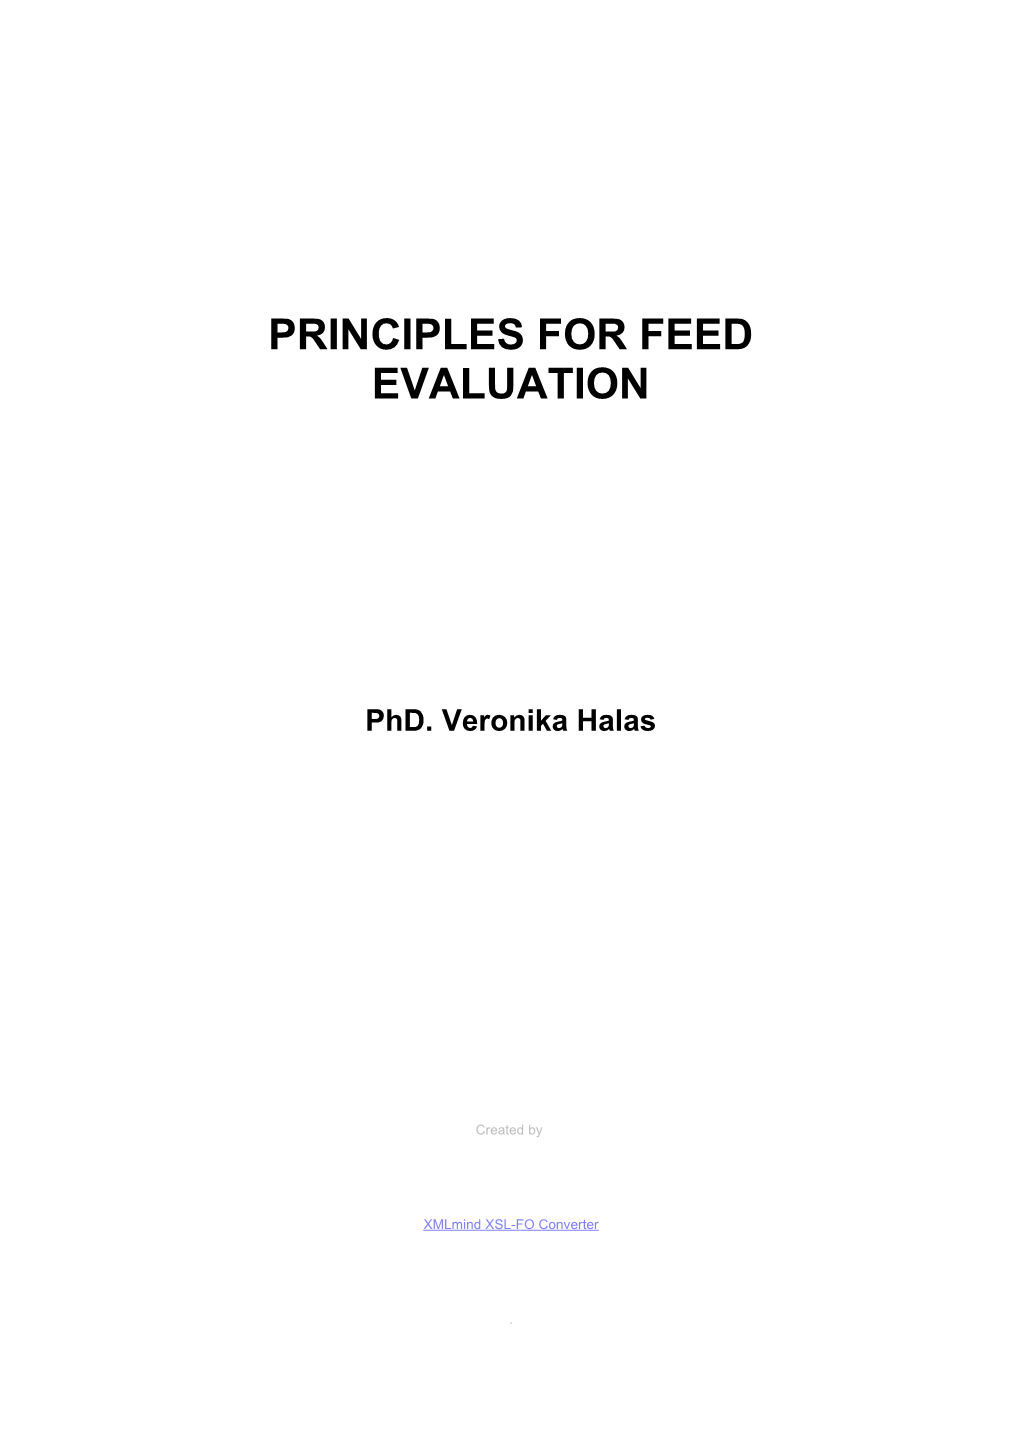 Principles for Feed Evaluation